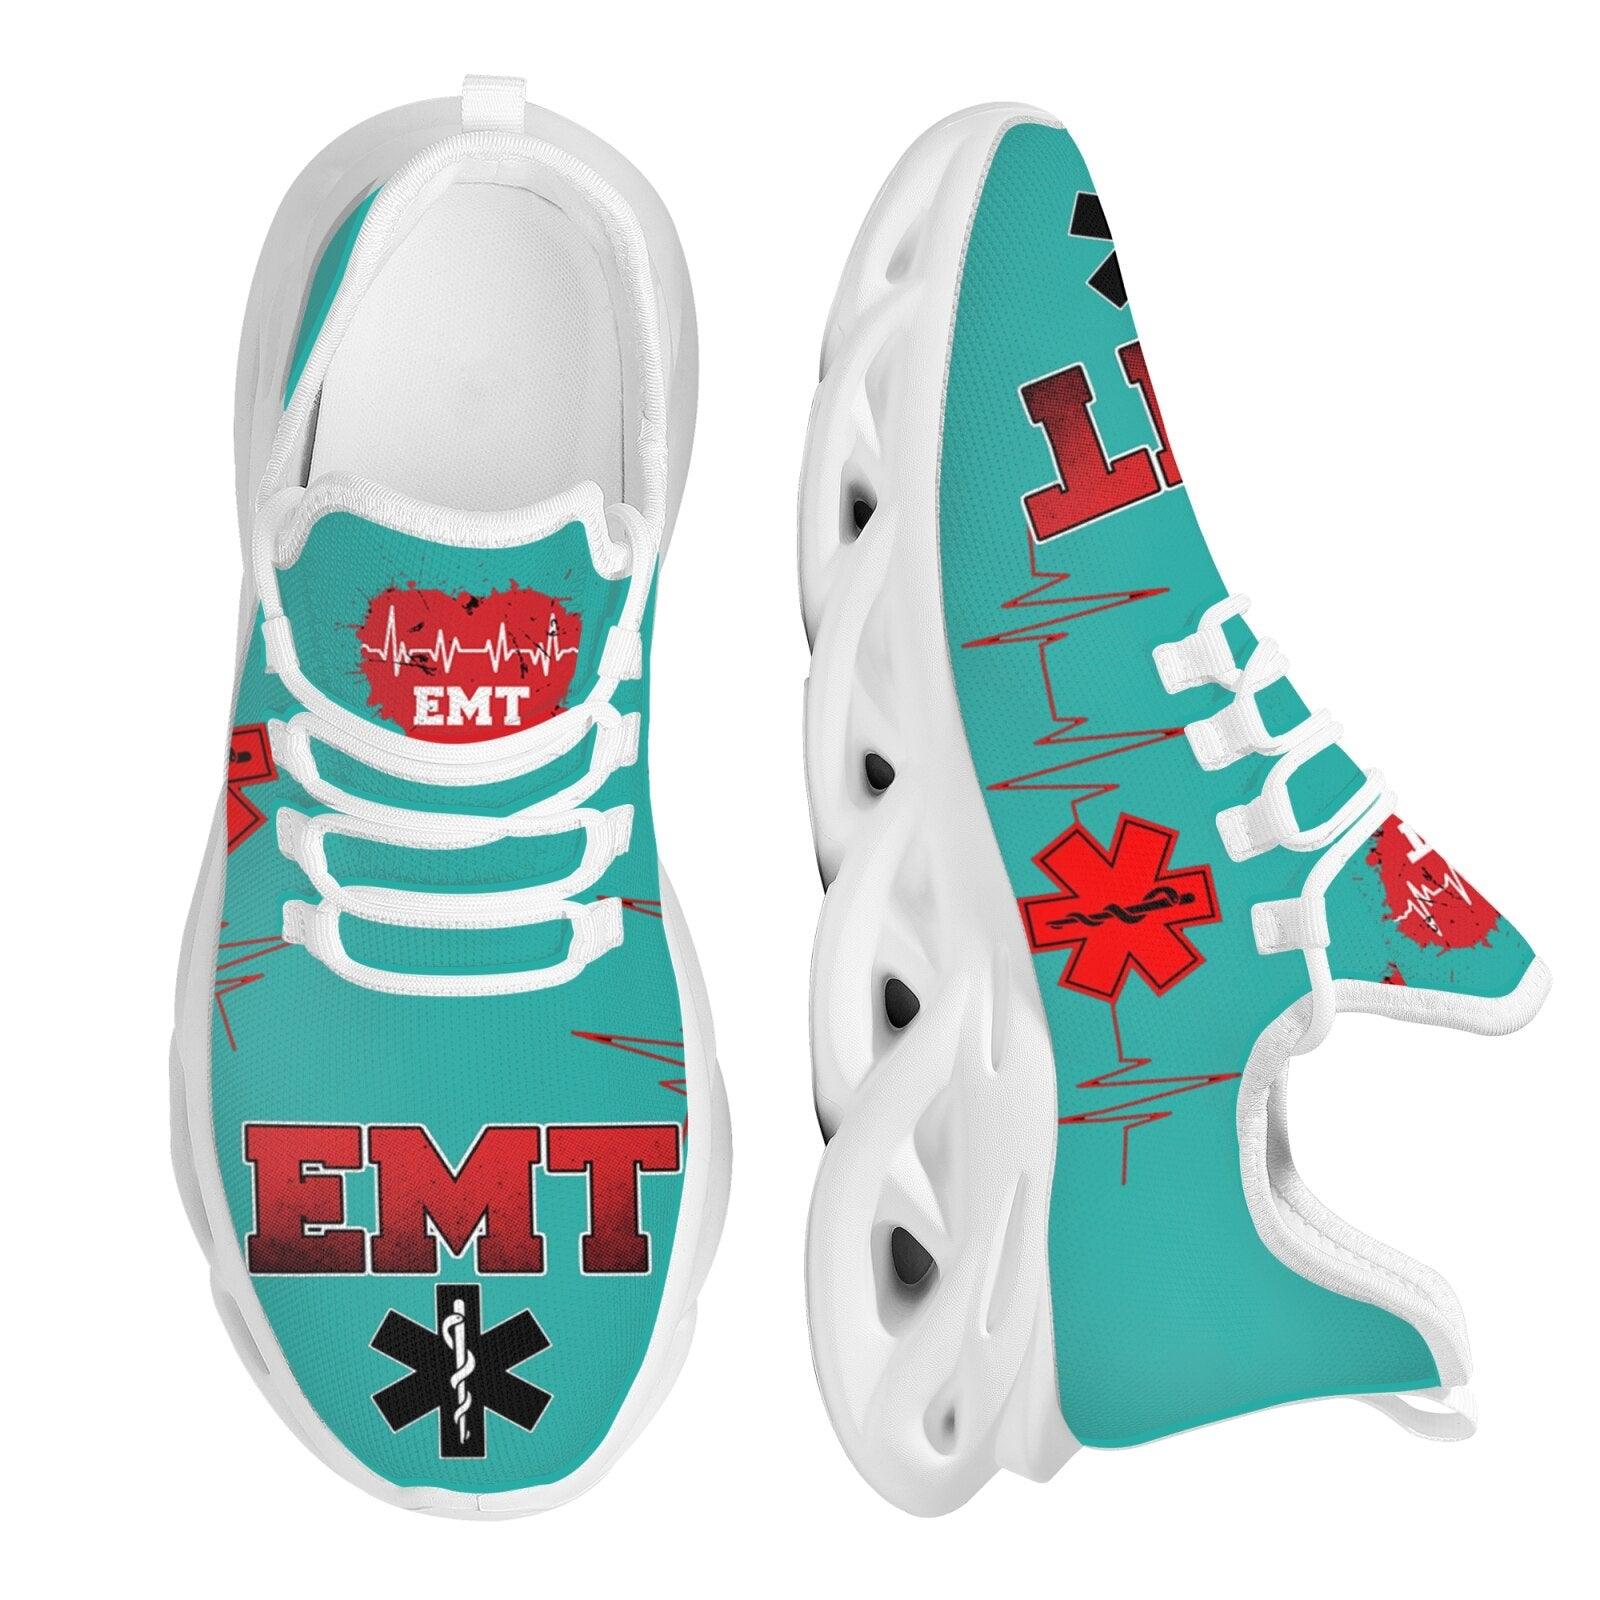 Paramedic EMT EMS Pattern Mesh Green Sneakers for Women Breathable Footwear - Thumbedtreats